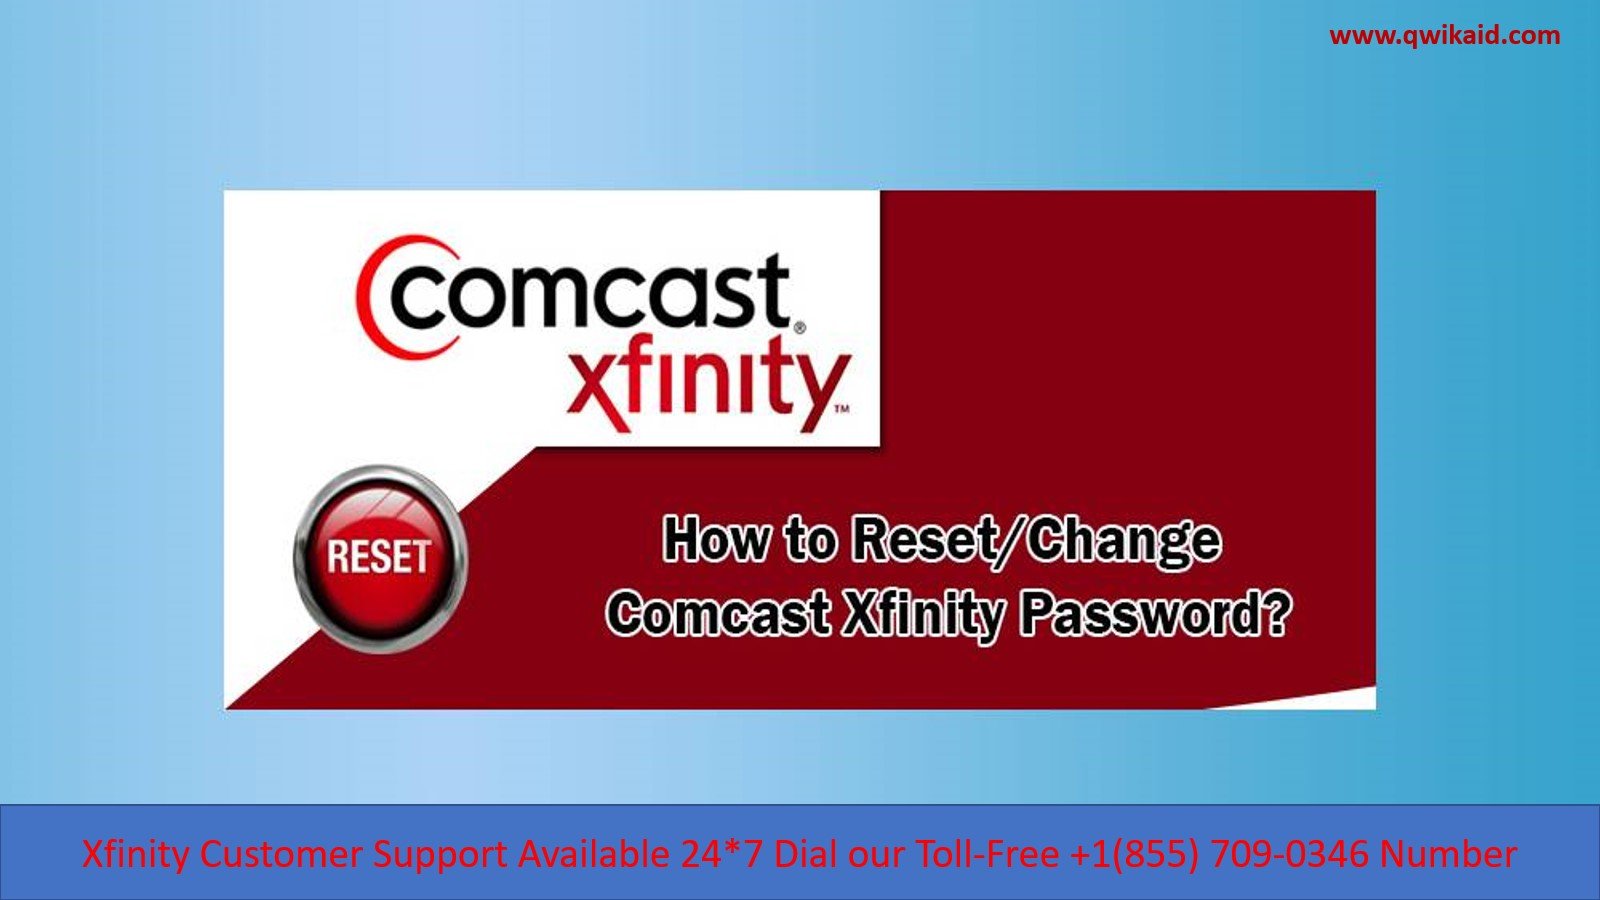 How to Reset or Change Xfinity Email Password when you Forgot Xfinity Password?